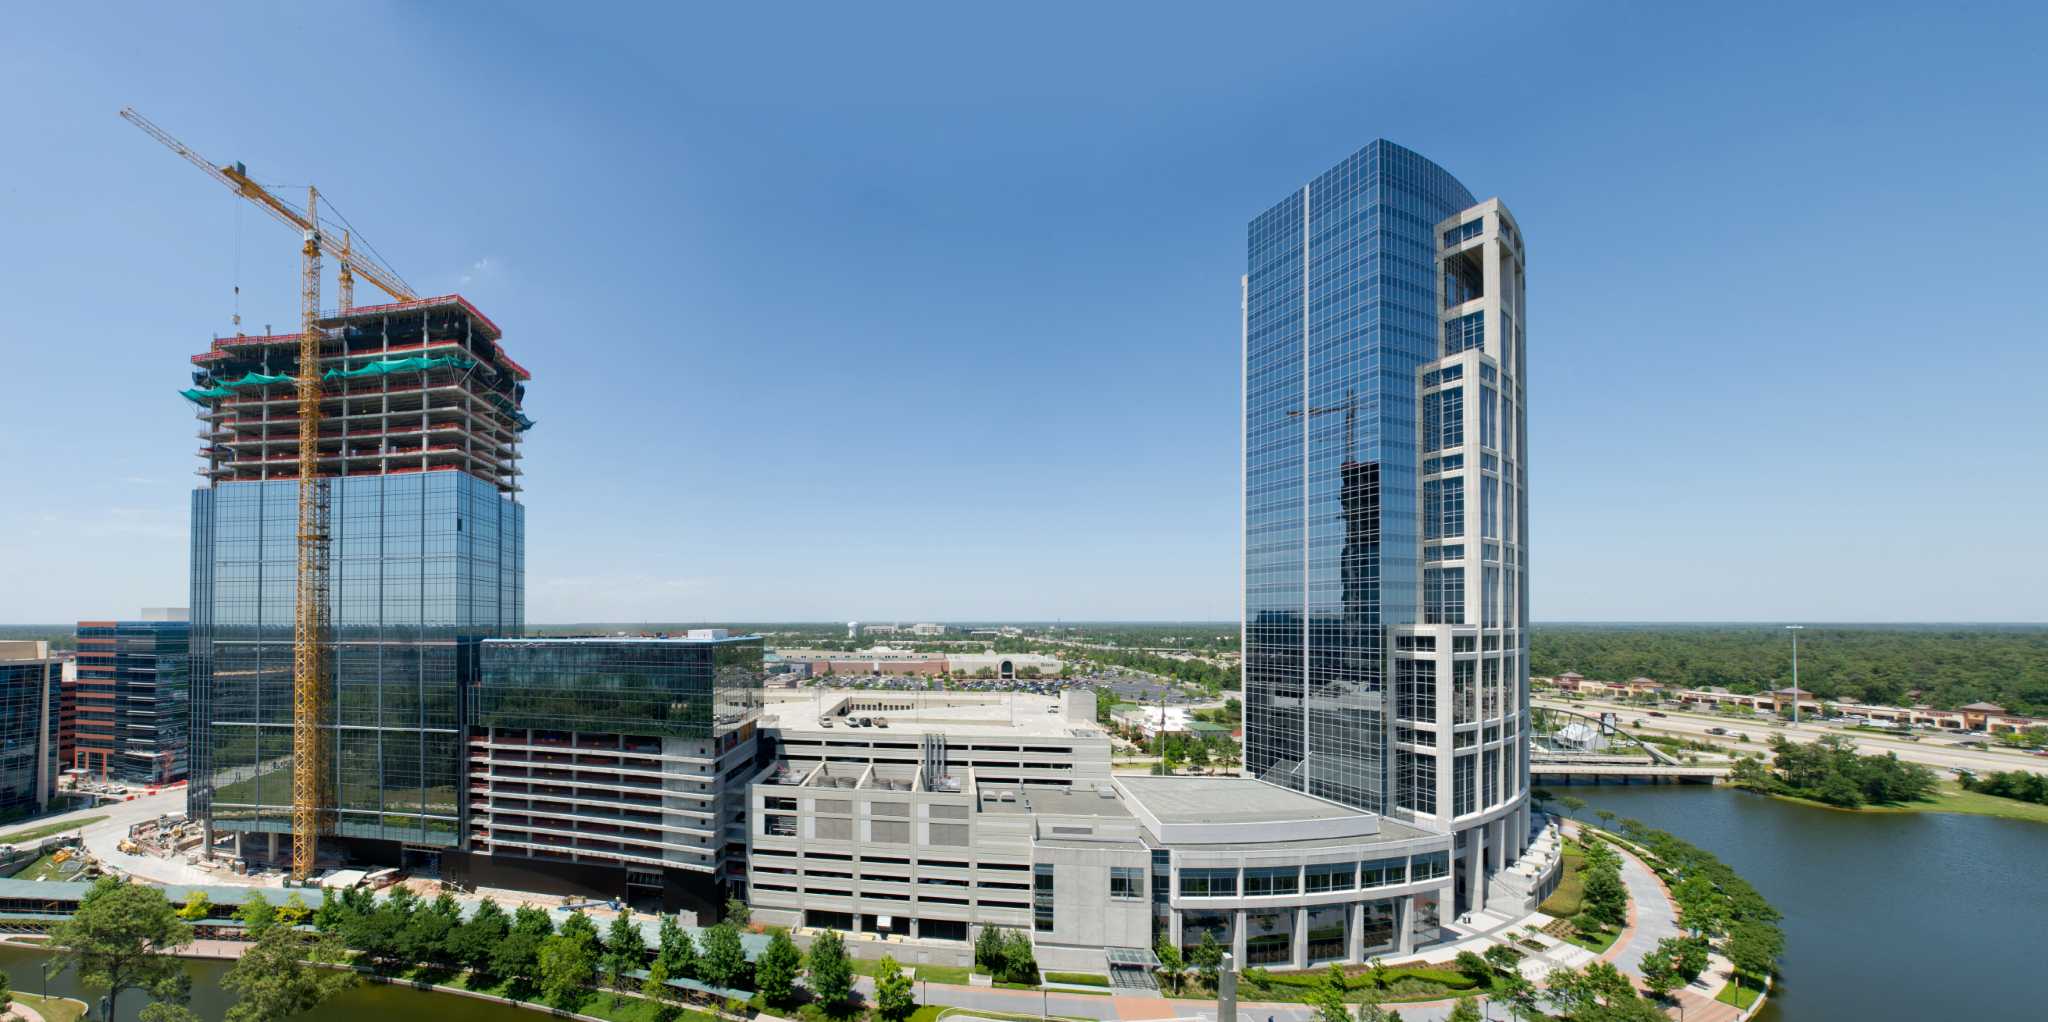 Deal of the week: Anadarko towers carry names of two past CEOs - Houston Chronicle2048 x 1022